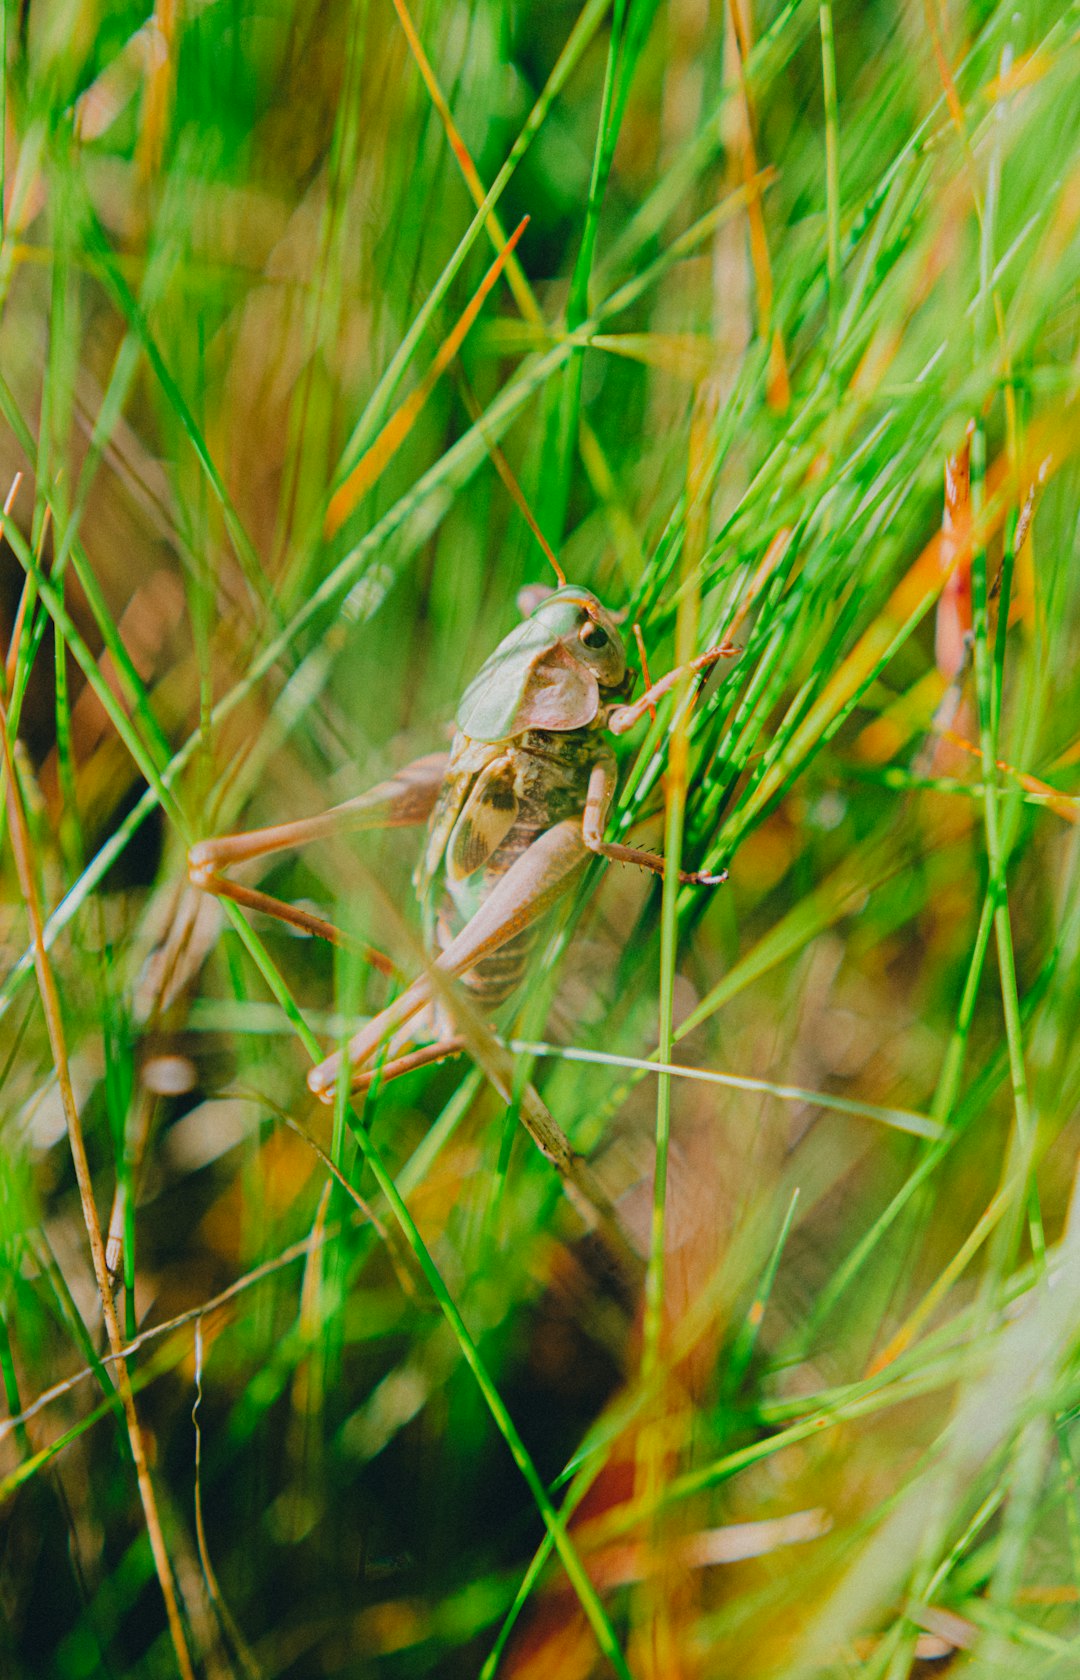 brown grasshopper perched on green grass in close up photography during daytime